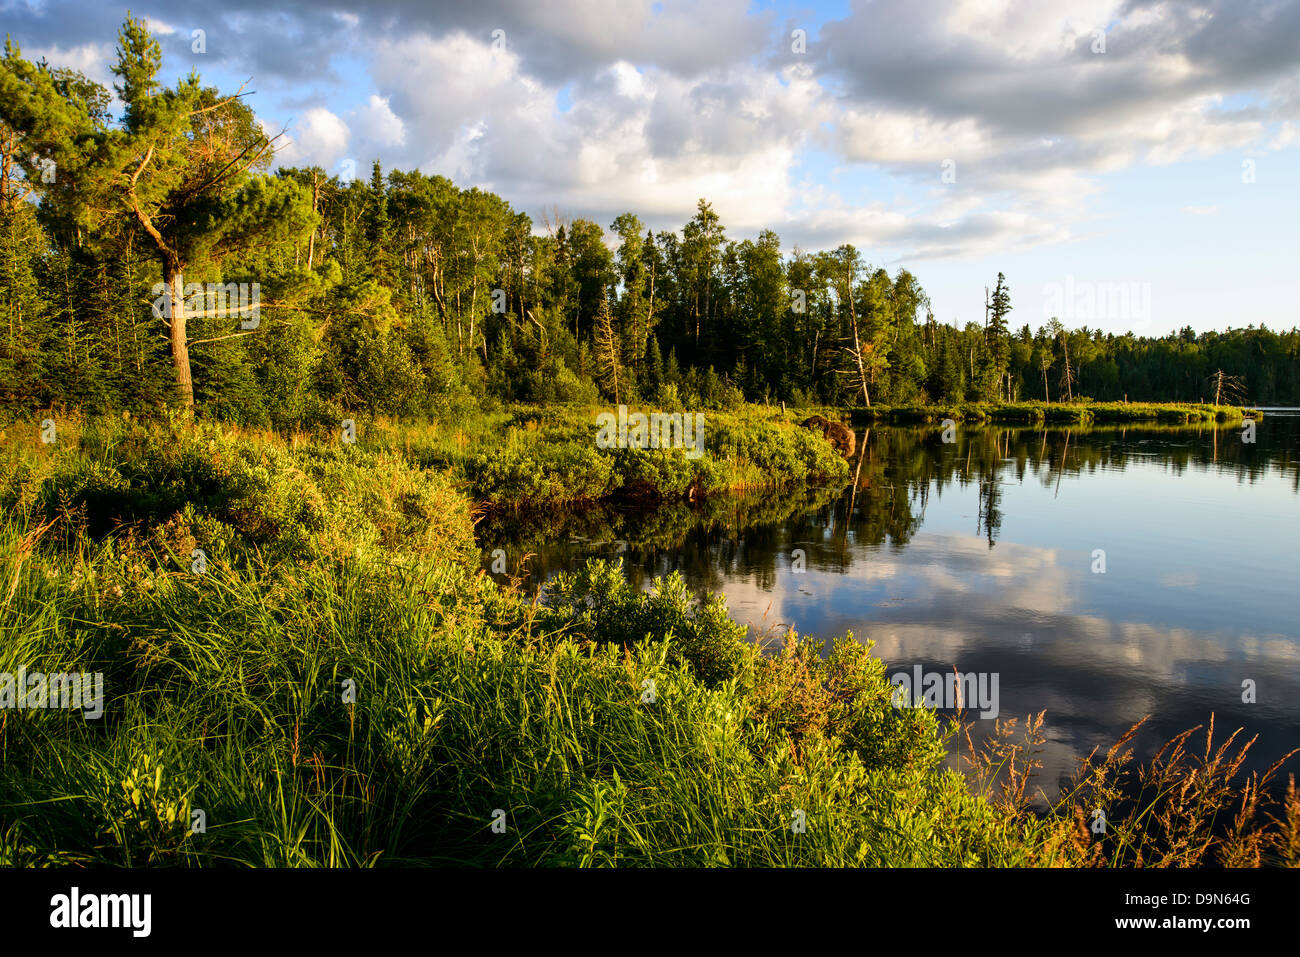 Lush green foliage lines the shore of Swamper Lake along the Gunflint Trail in northern Minnesota. Stock Photo